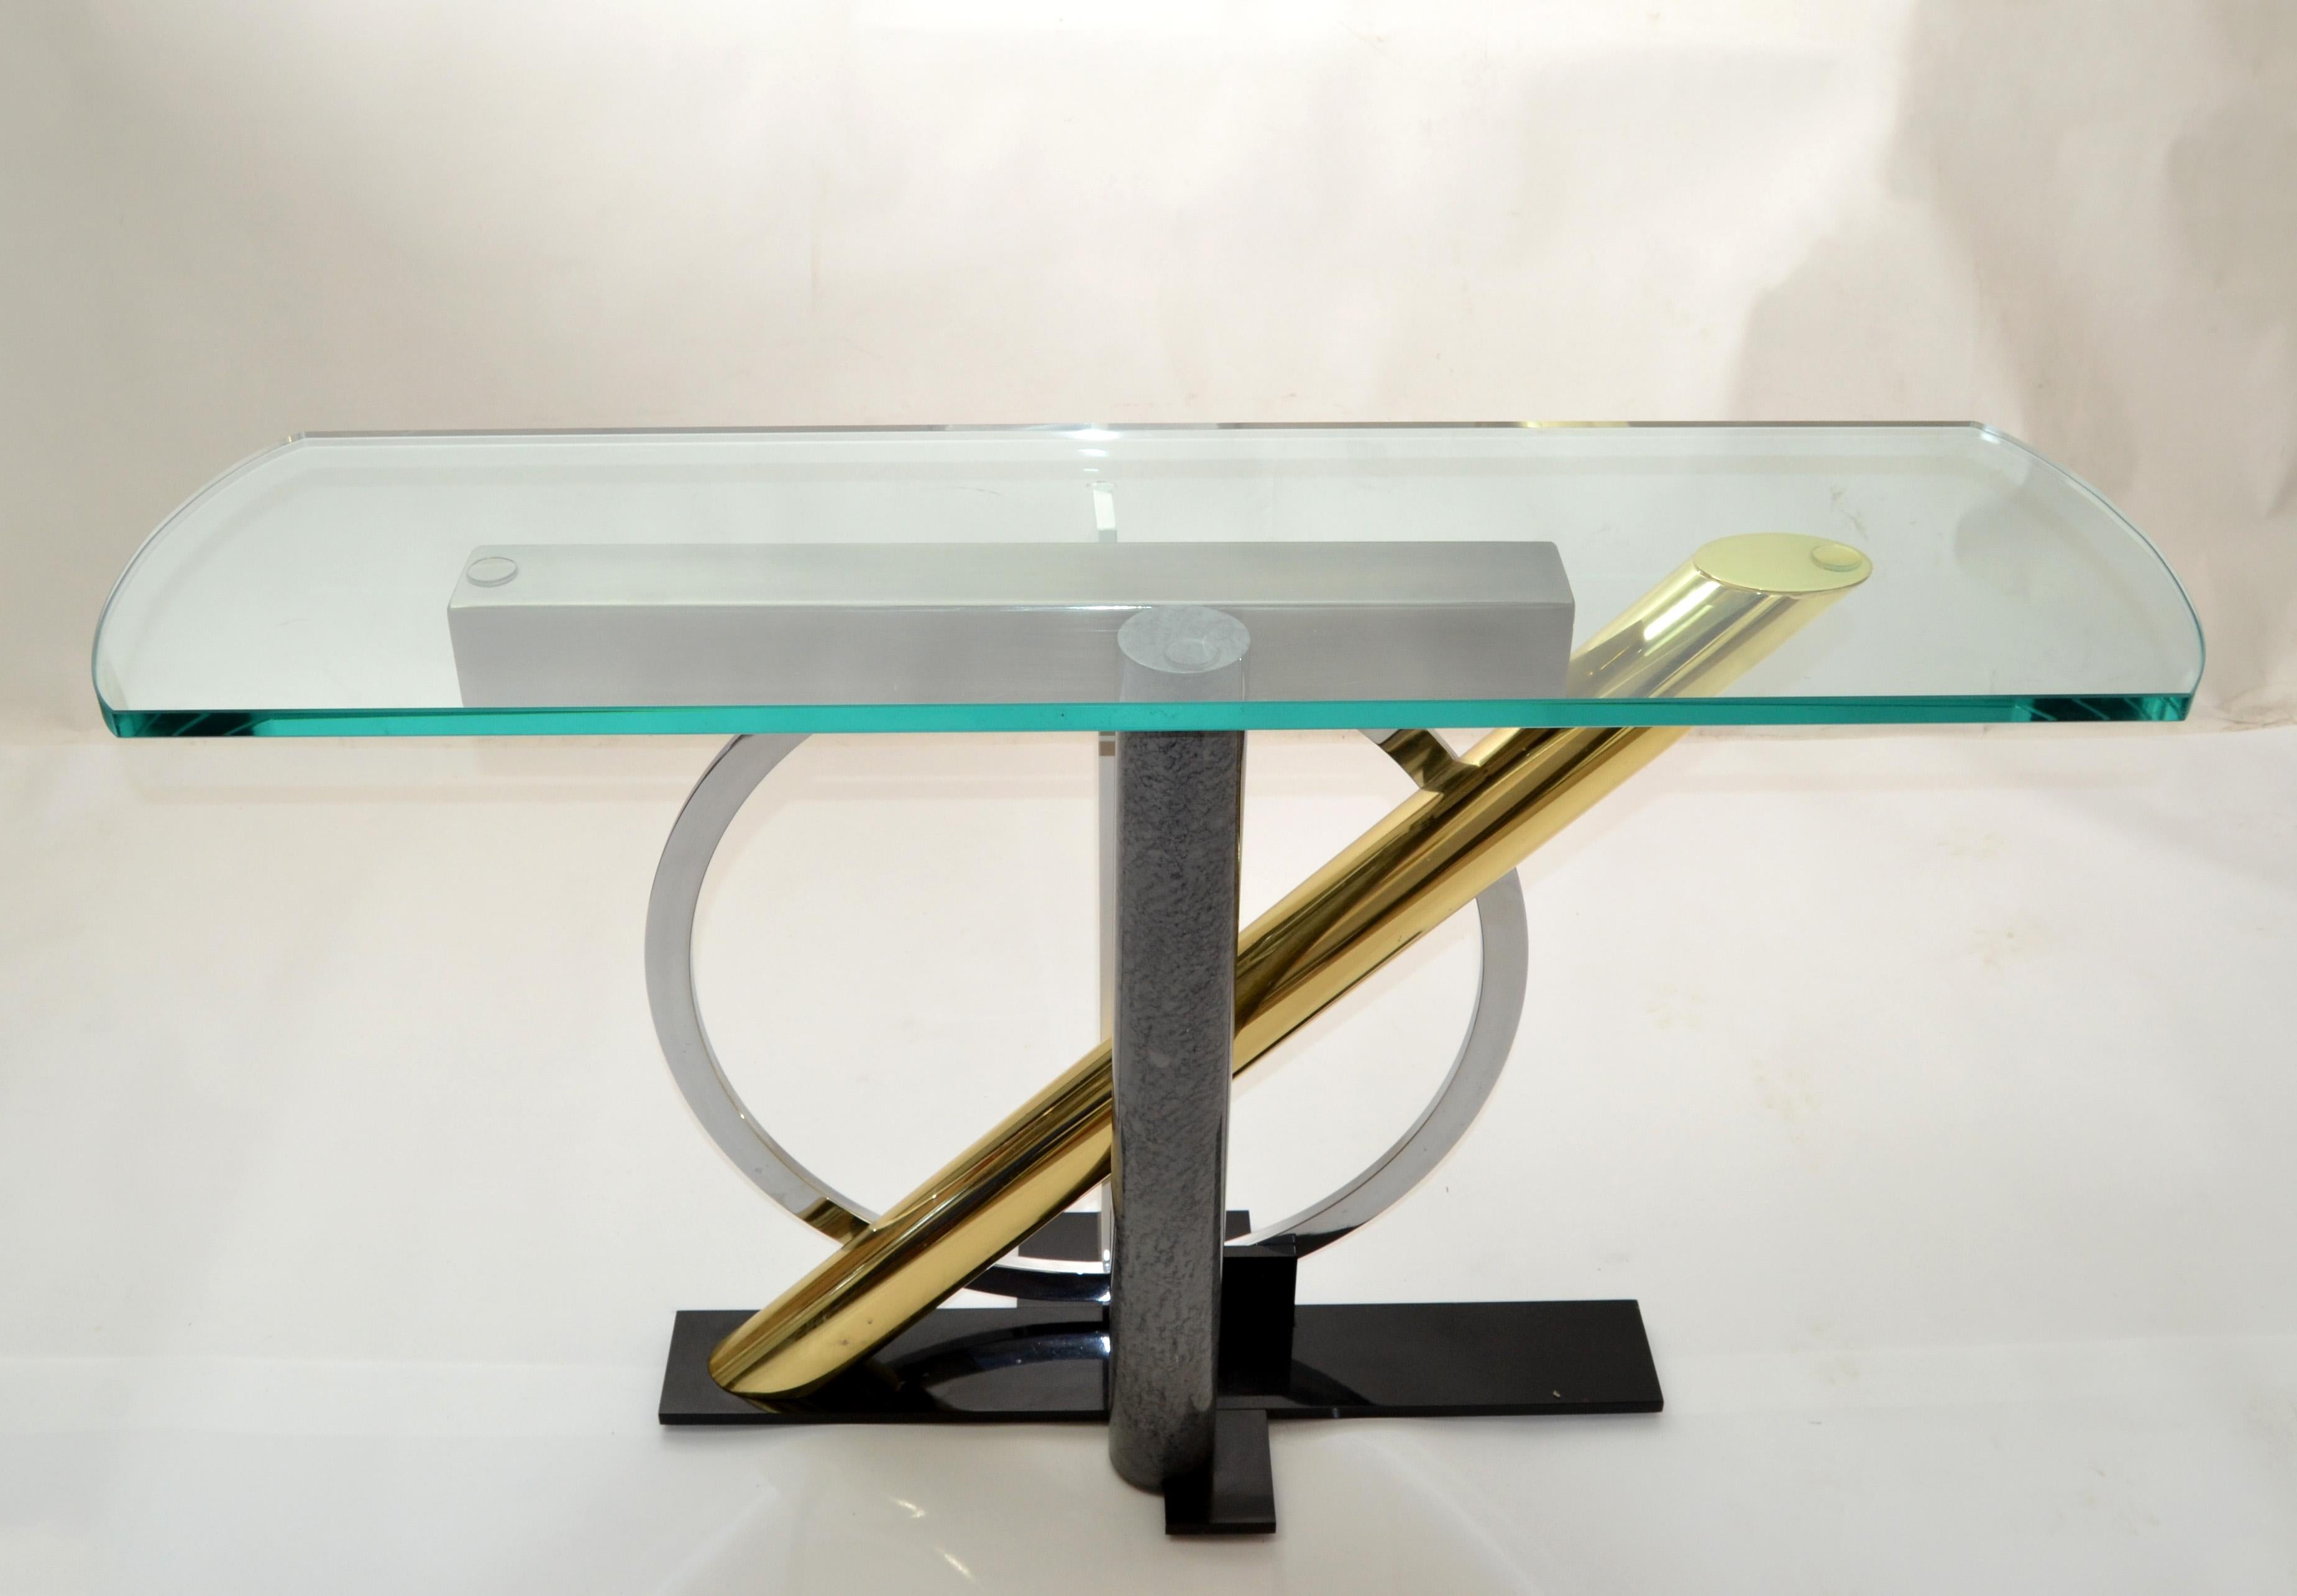 Kaizo Oto fascinating console table from the Design Institute of America. 
A five-variety metal construction fantasy for the living room or Hallway.
The 1980s design showcases that everything is possible, and optimism ruled those who designed